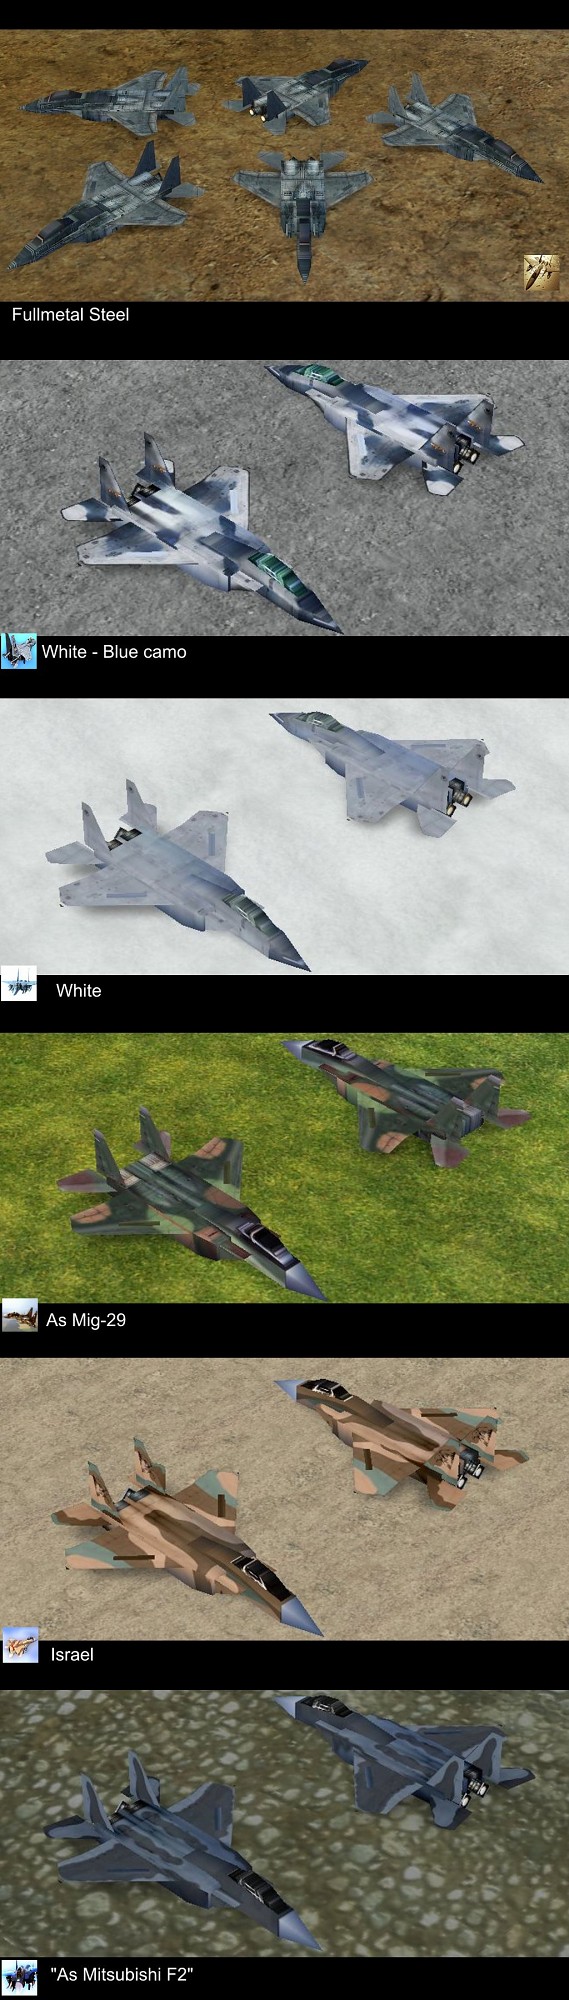 New Skins for F15 Fighter